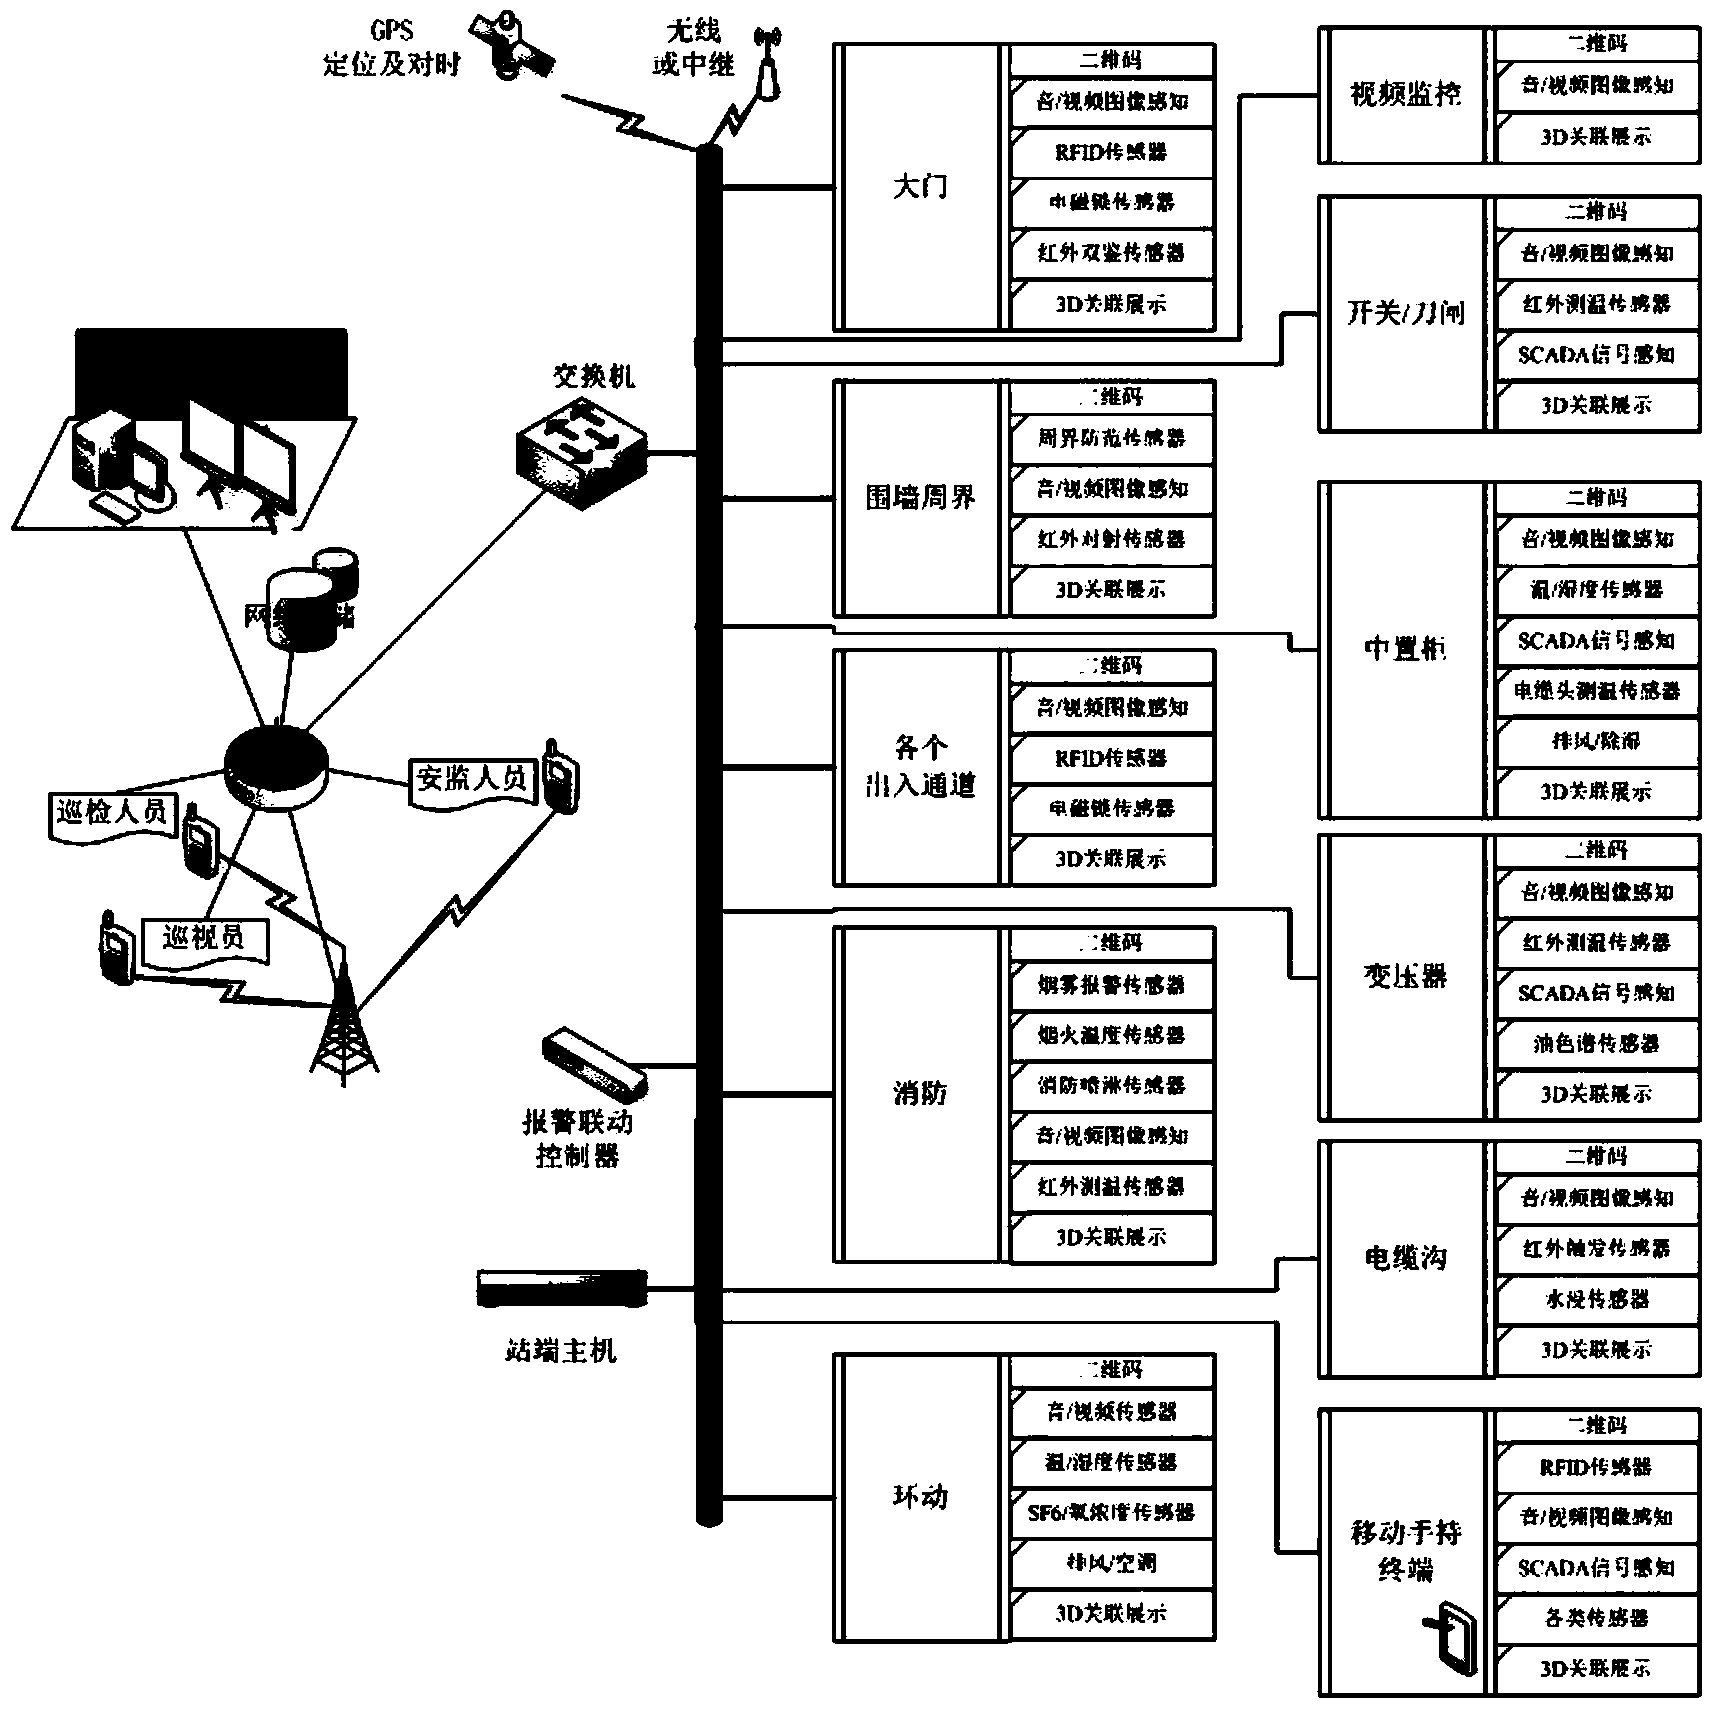 System used for controlling process specifications and full equipment lifecycle in electric power system